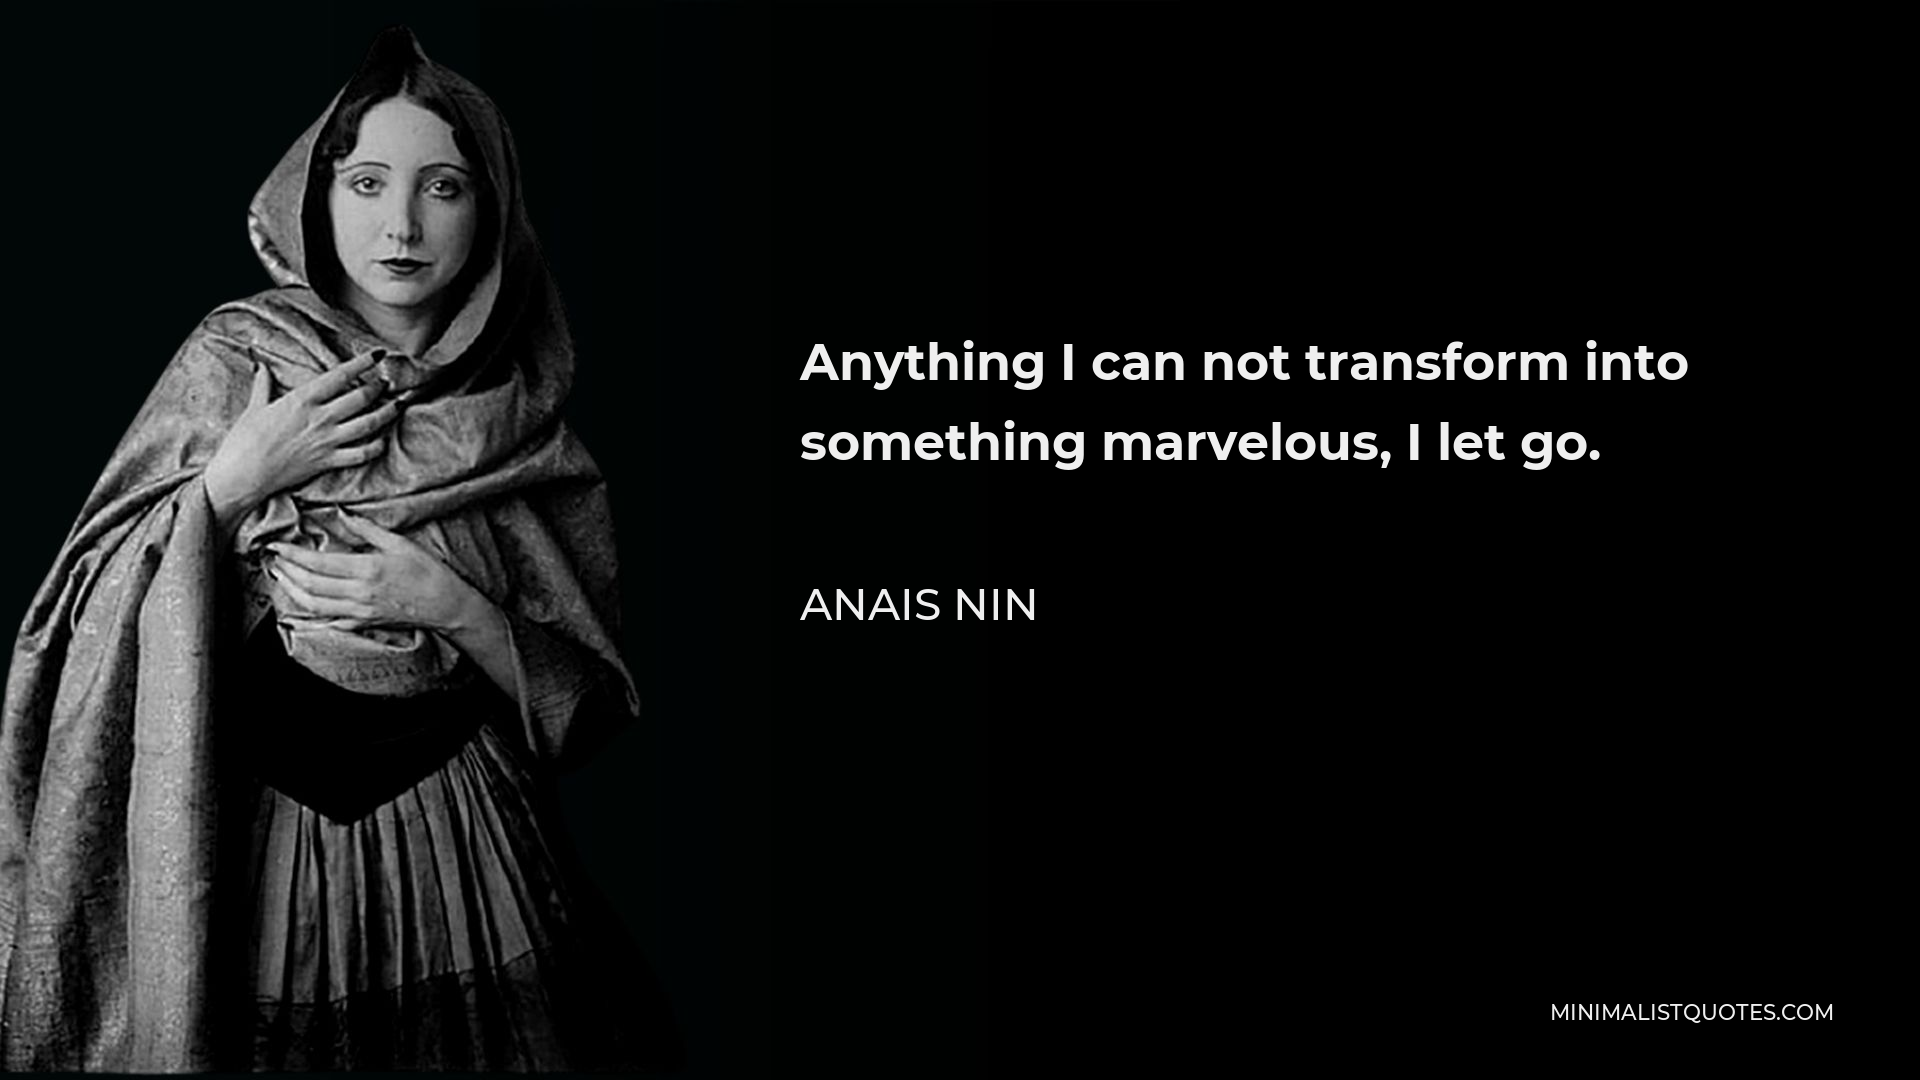 Anais Nin Quote - Anything I can not transform into something marvelous, I let go.